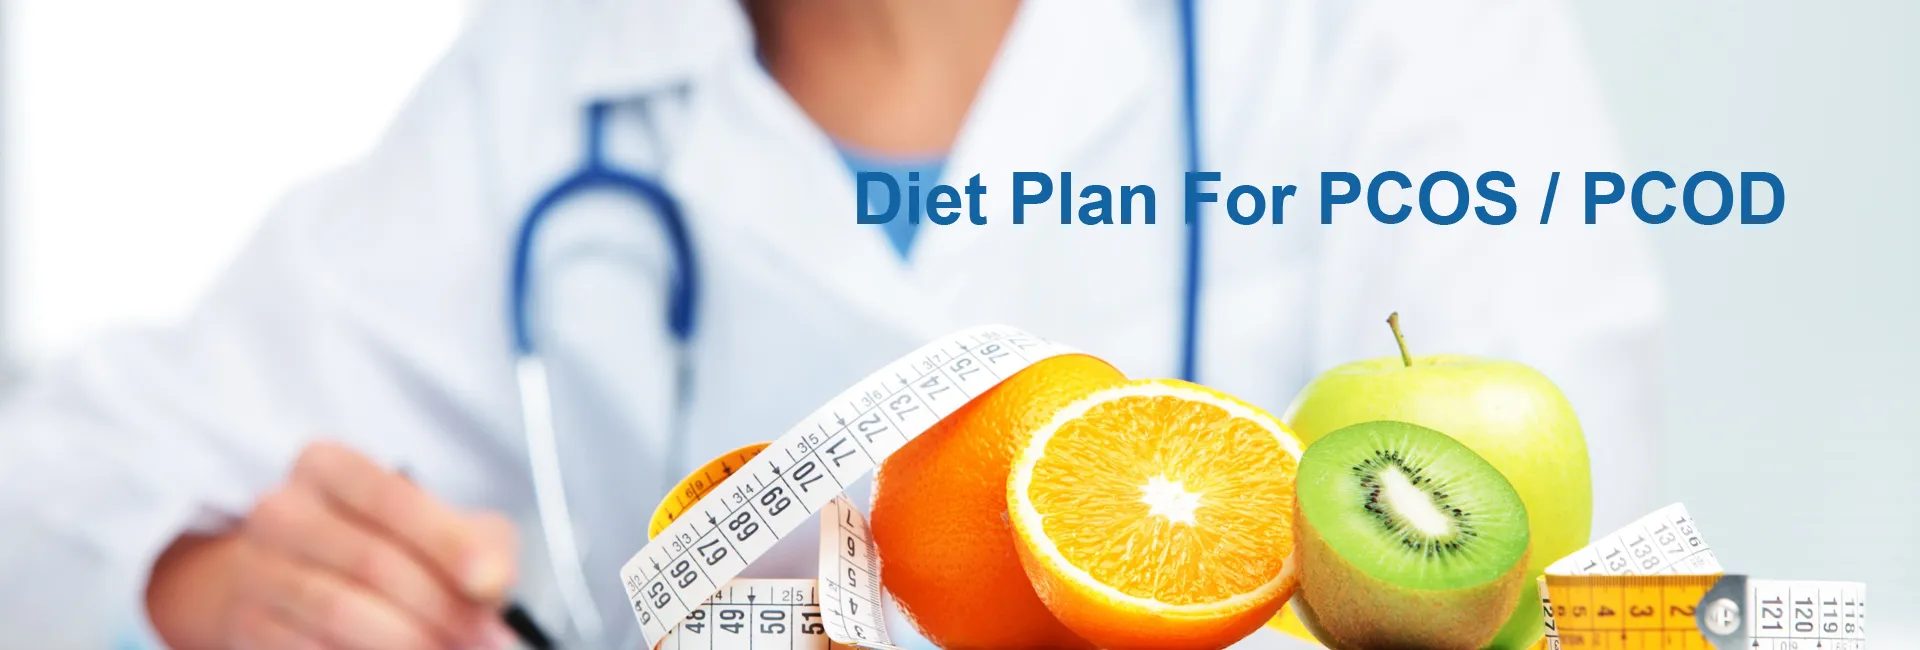 Diet Plan For PCOS / PCOD In Becancour